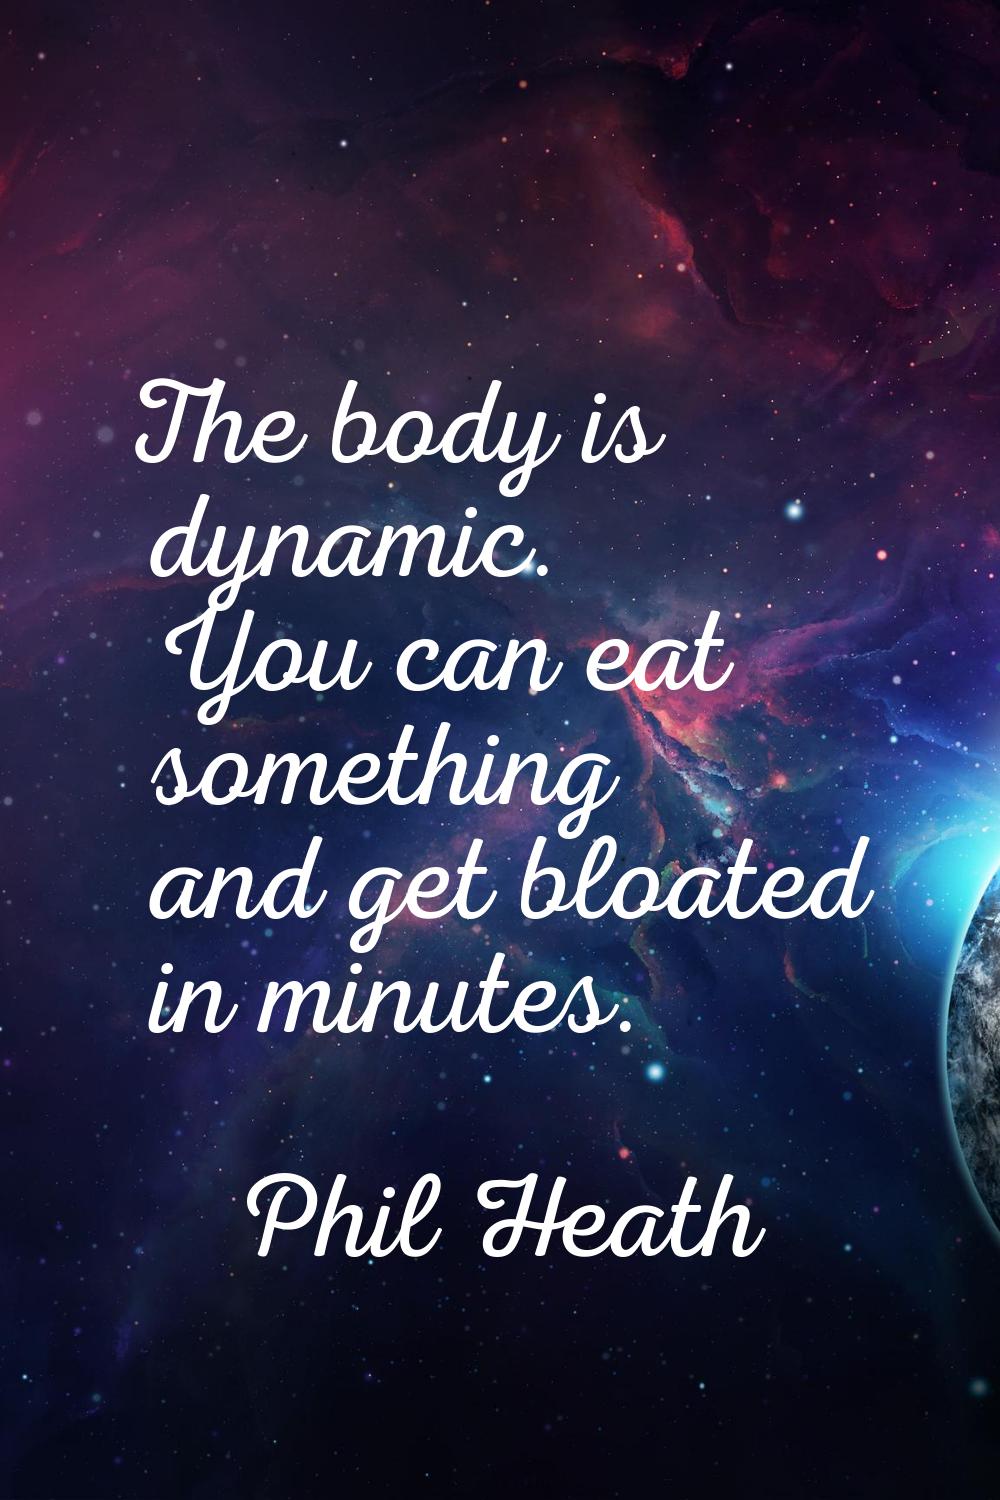 The body is dynamic. You can eat something and get bloated in minutes.